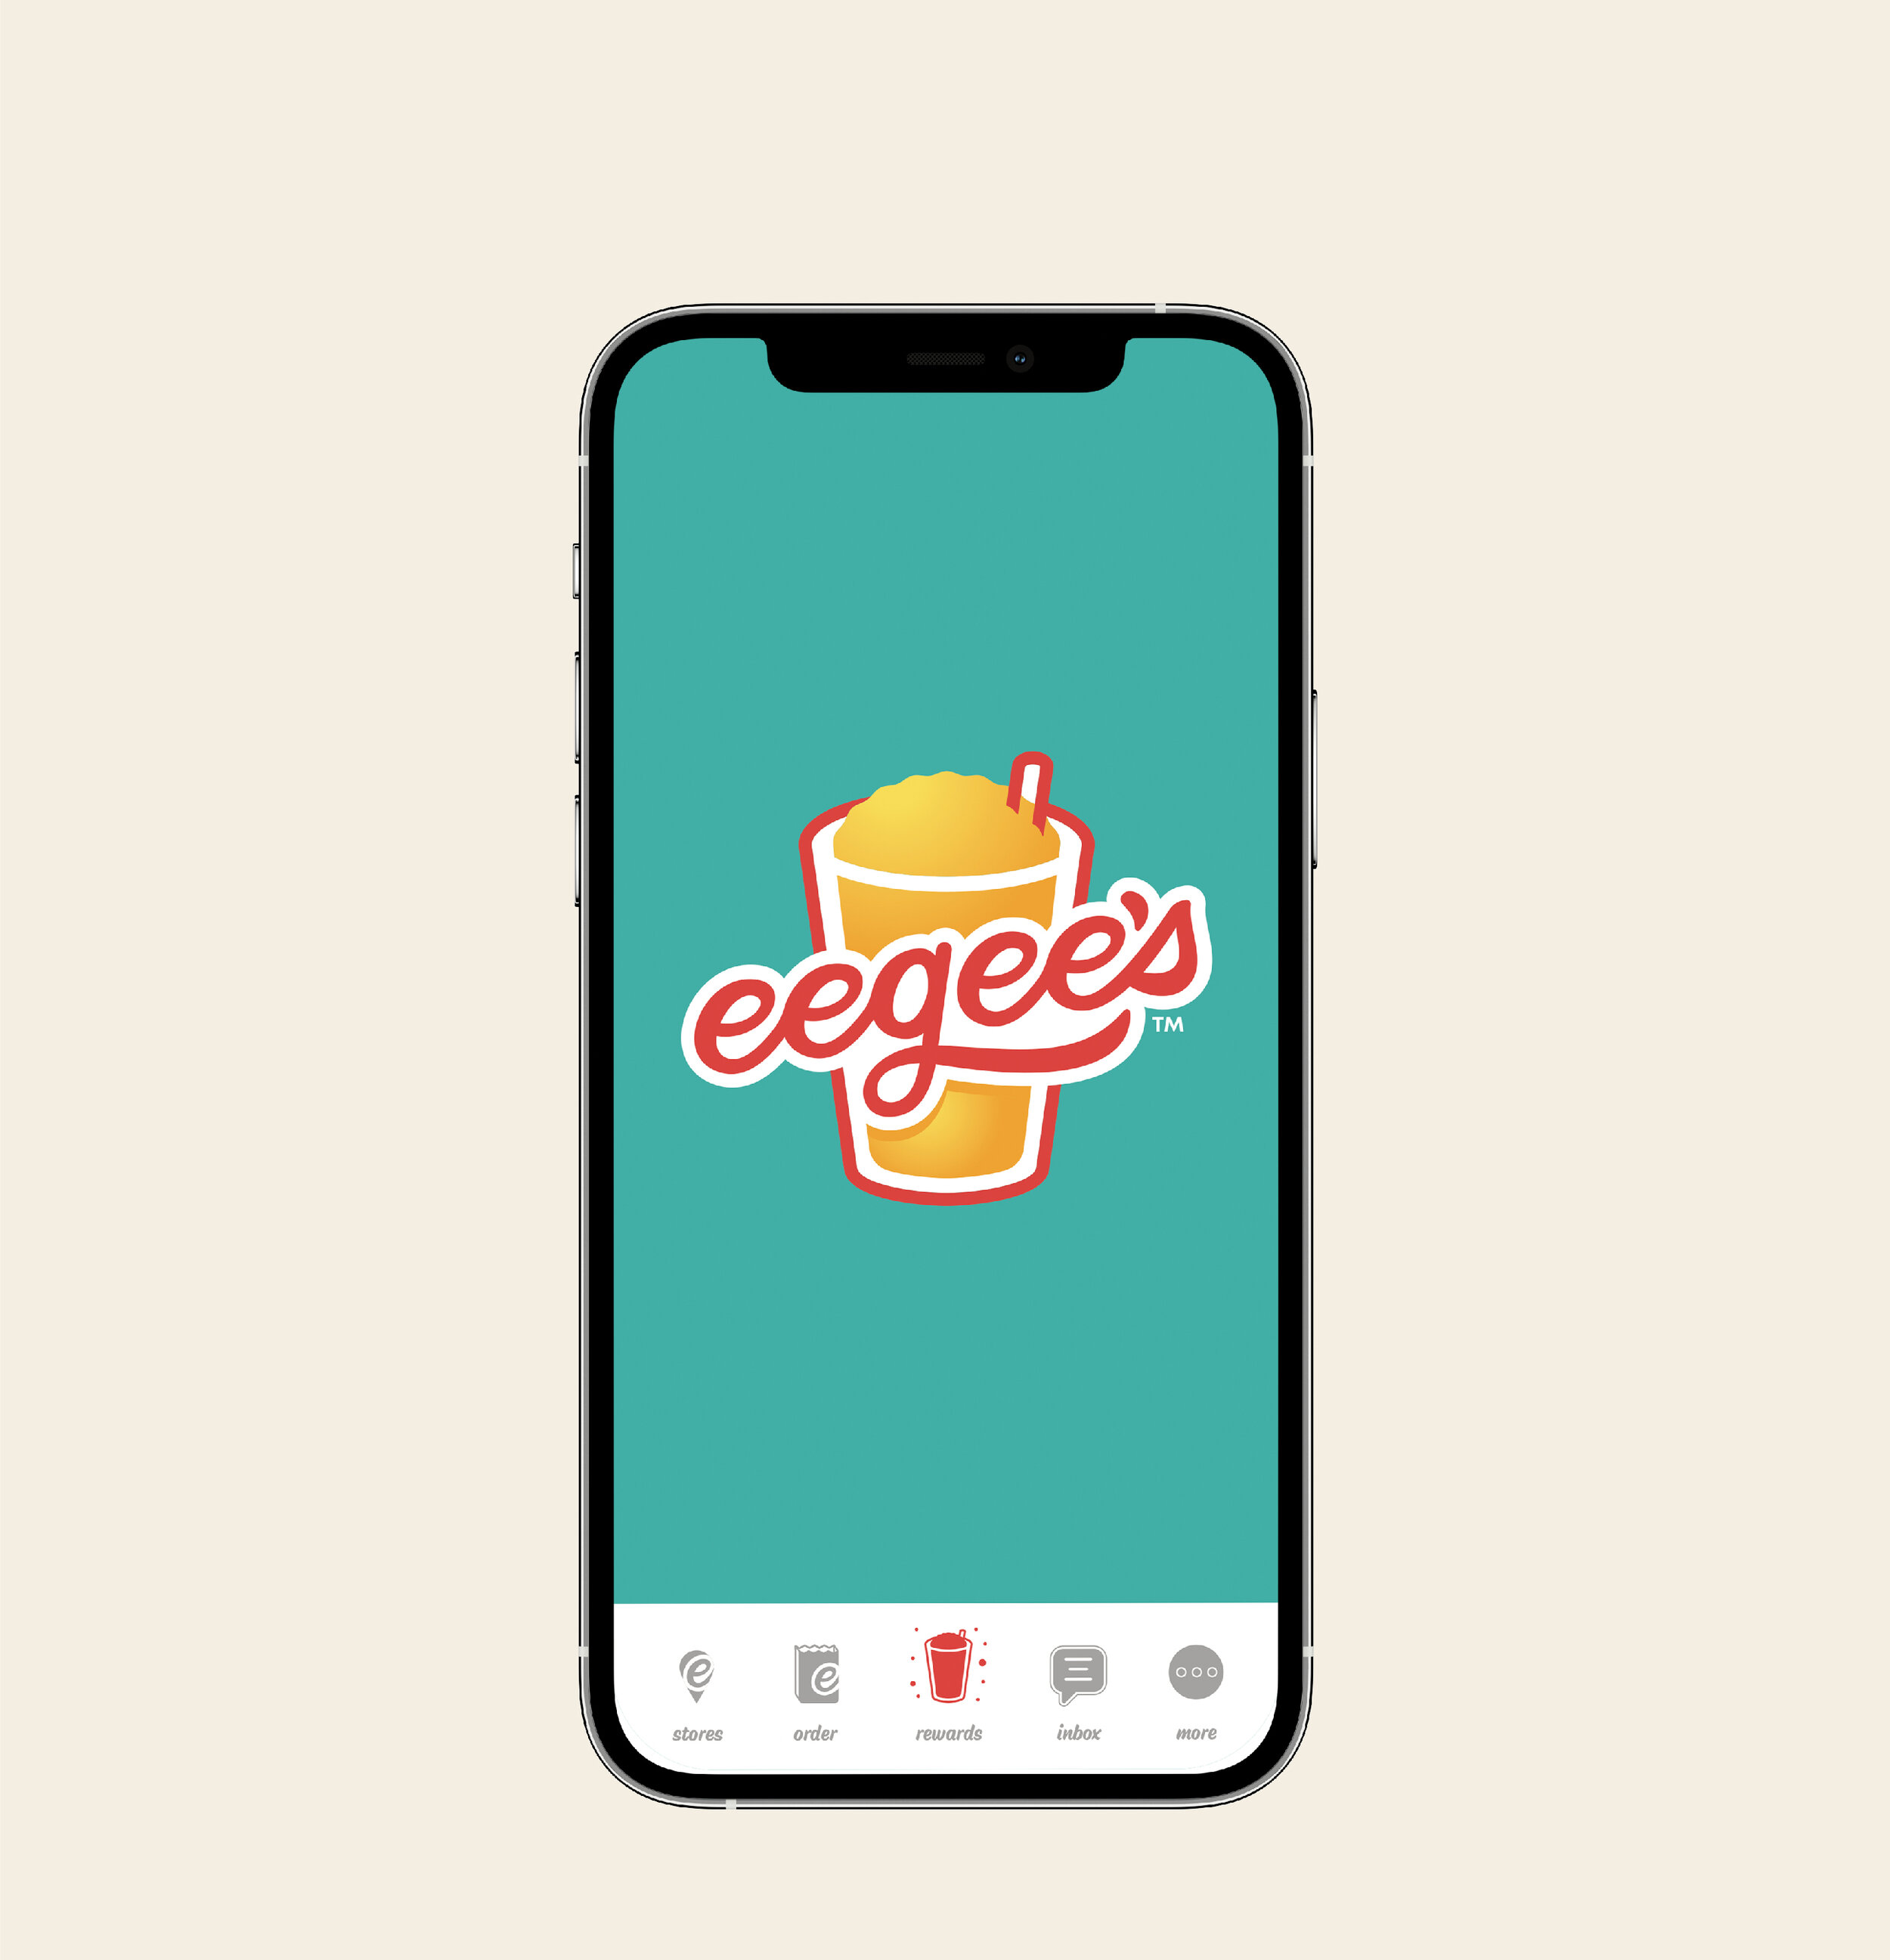 Eegees_Craveable Dishes copy 2.jpg